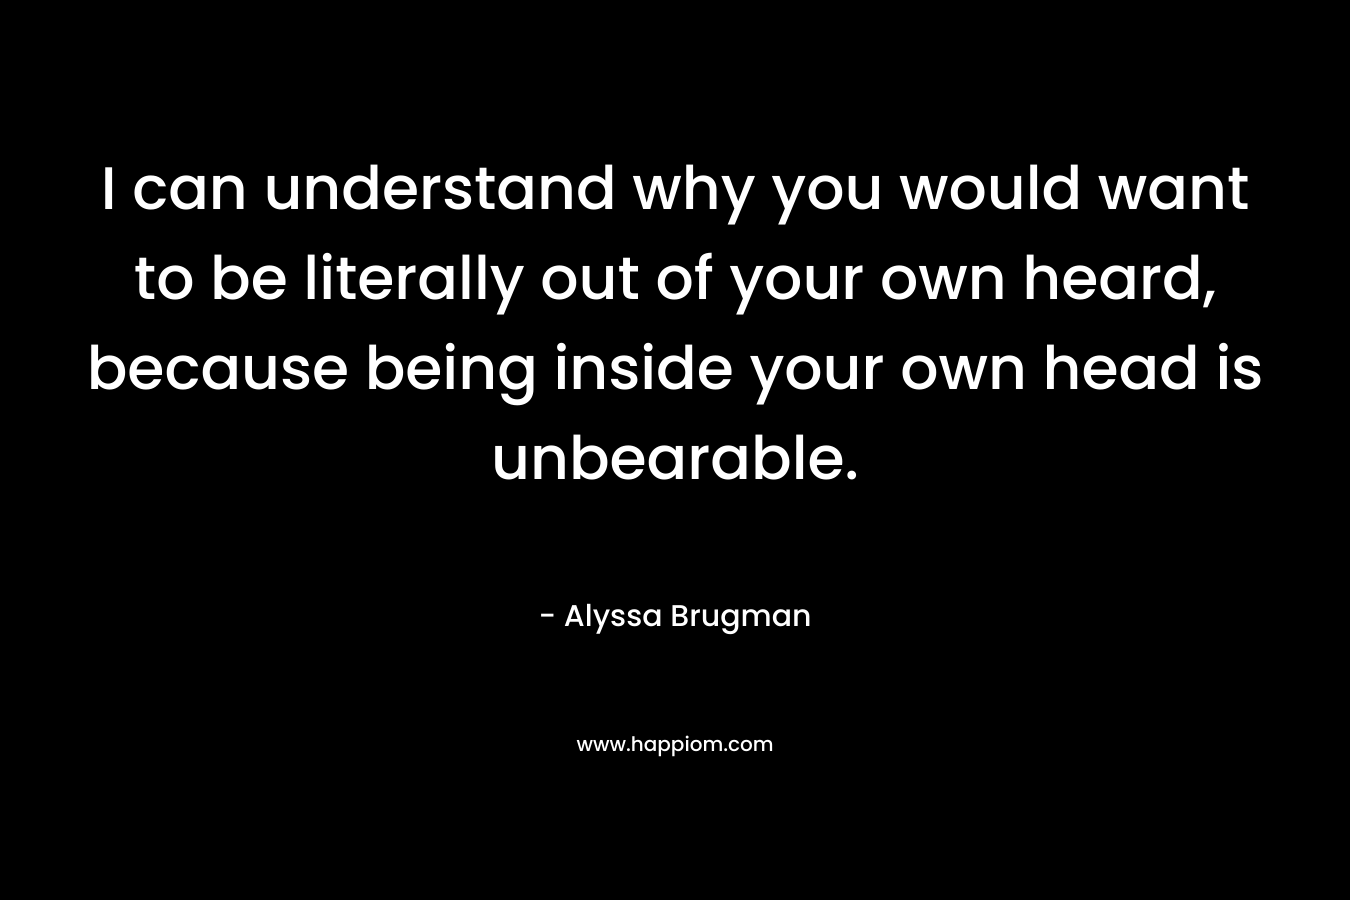 I can understand why you would want to be literally out of your own heard, because being inside your own head is unbearable. – Alyssa Brugman